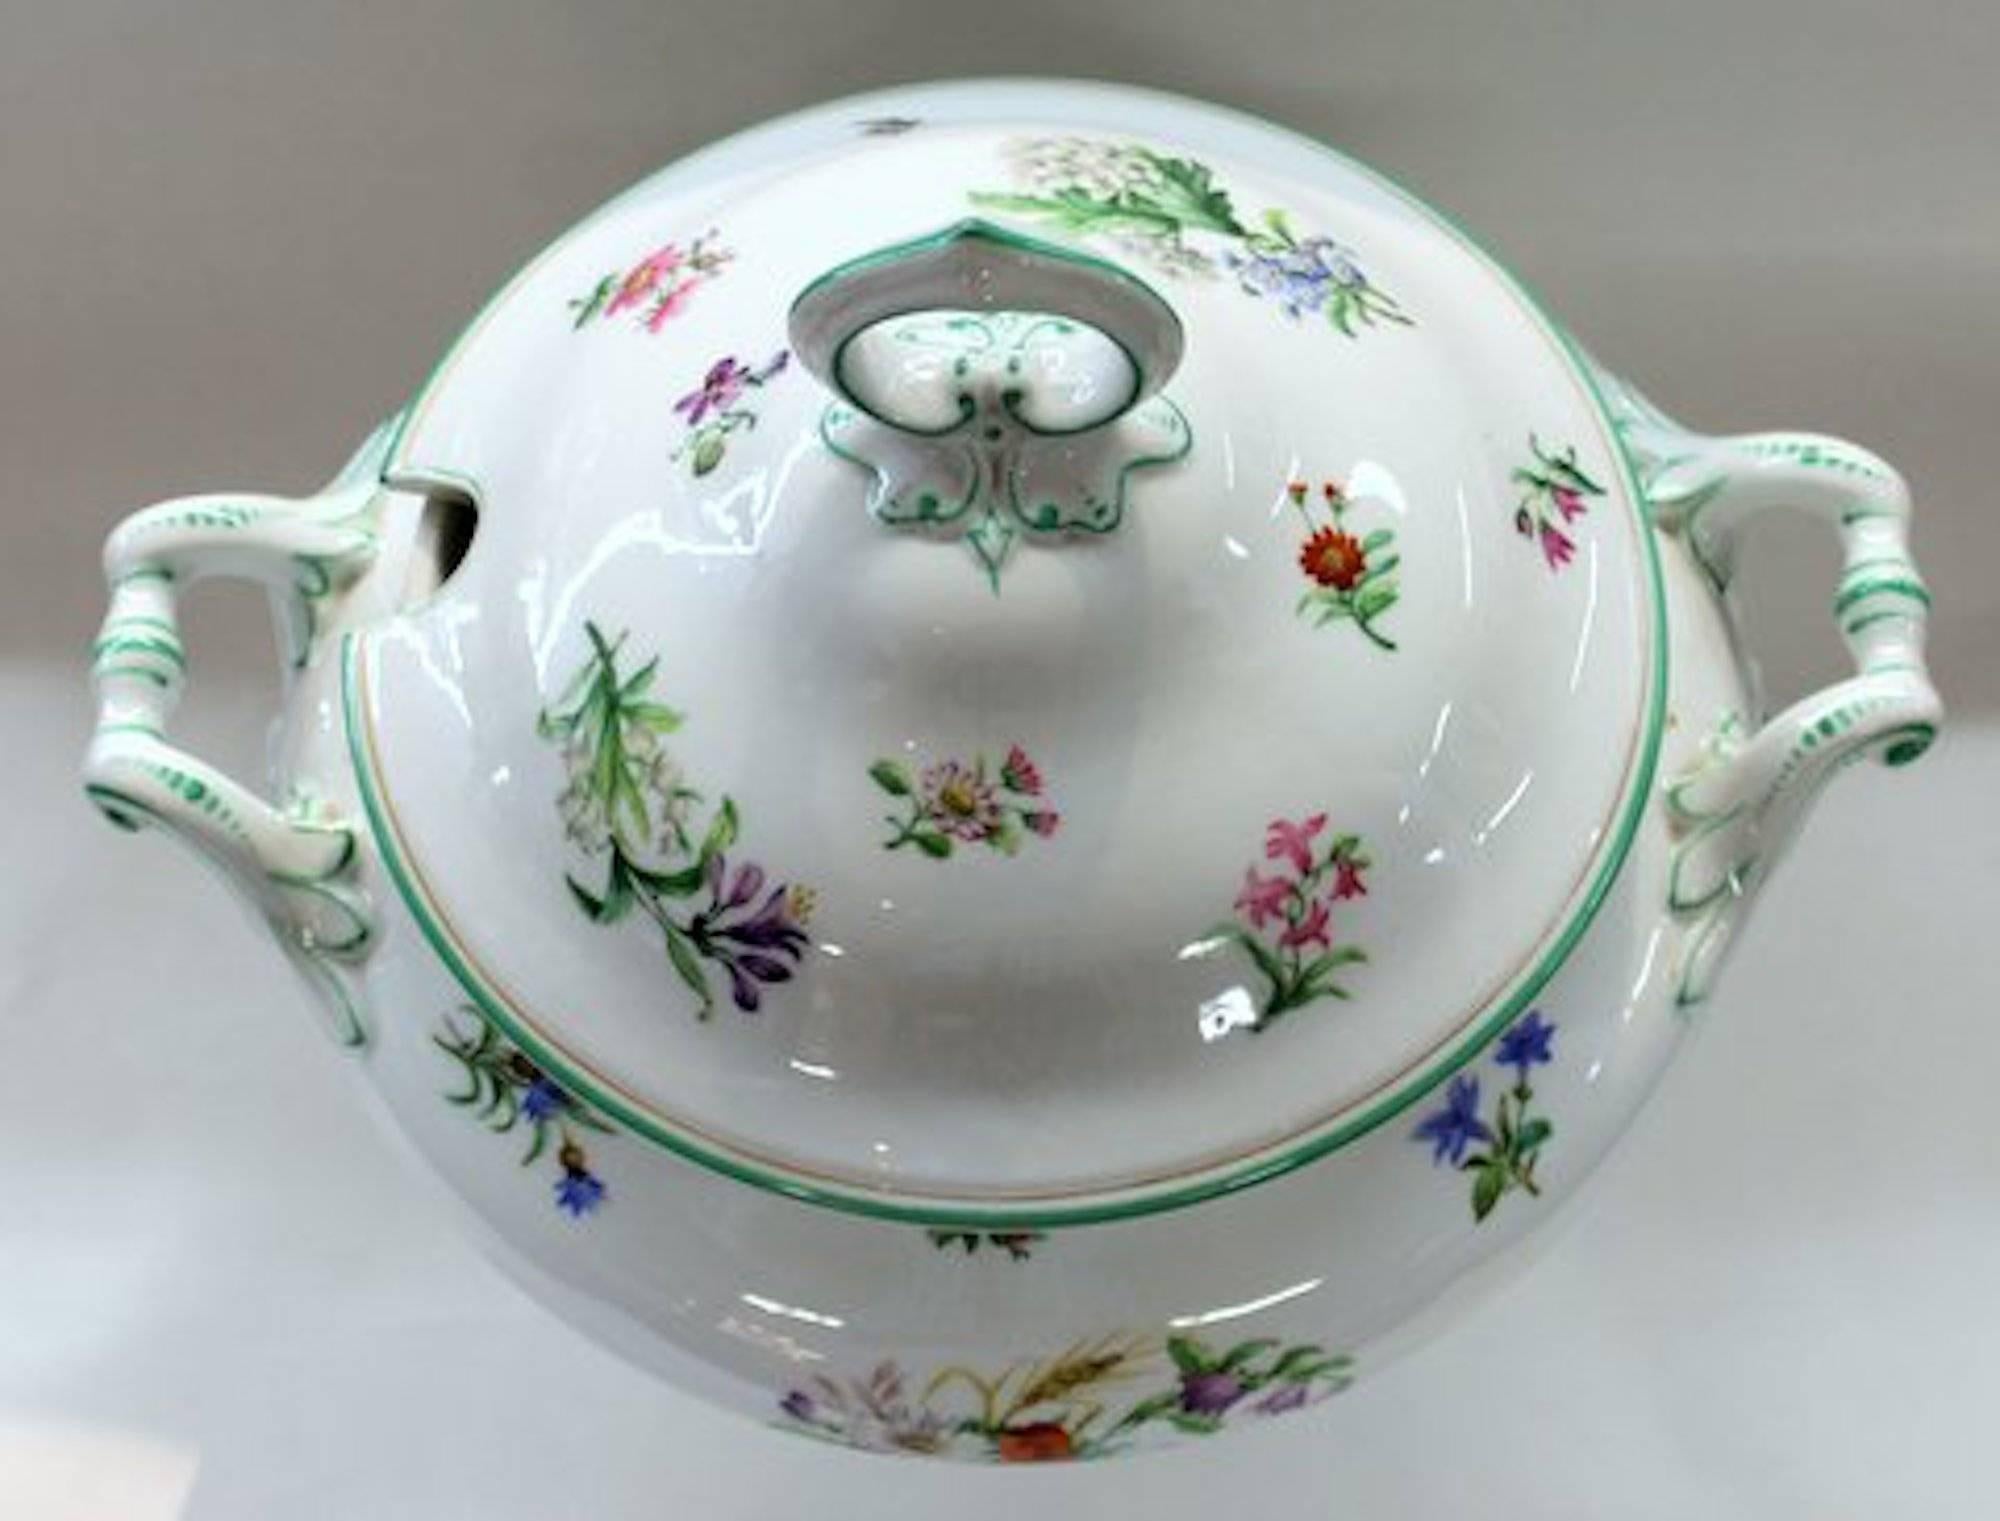 Fine antique Continental hand-painted porcelain botanical motif soup tureen.

With interesting and beautifully hand-painted botanical and insect motifs throughout.  Impressed 